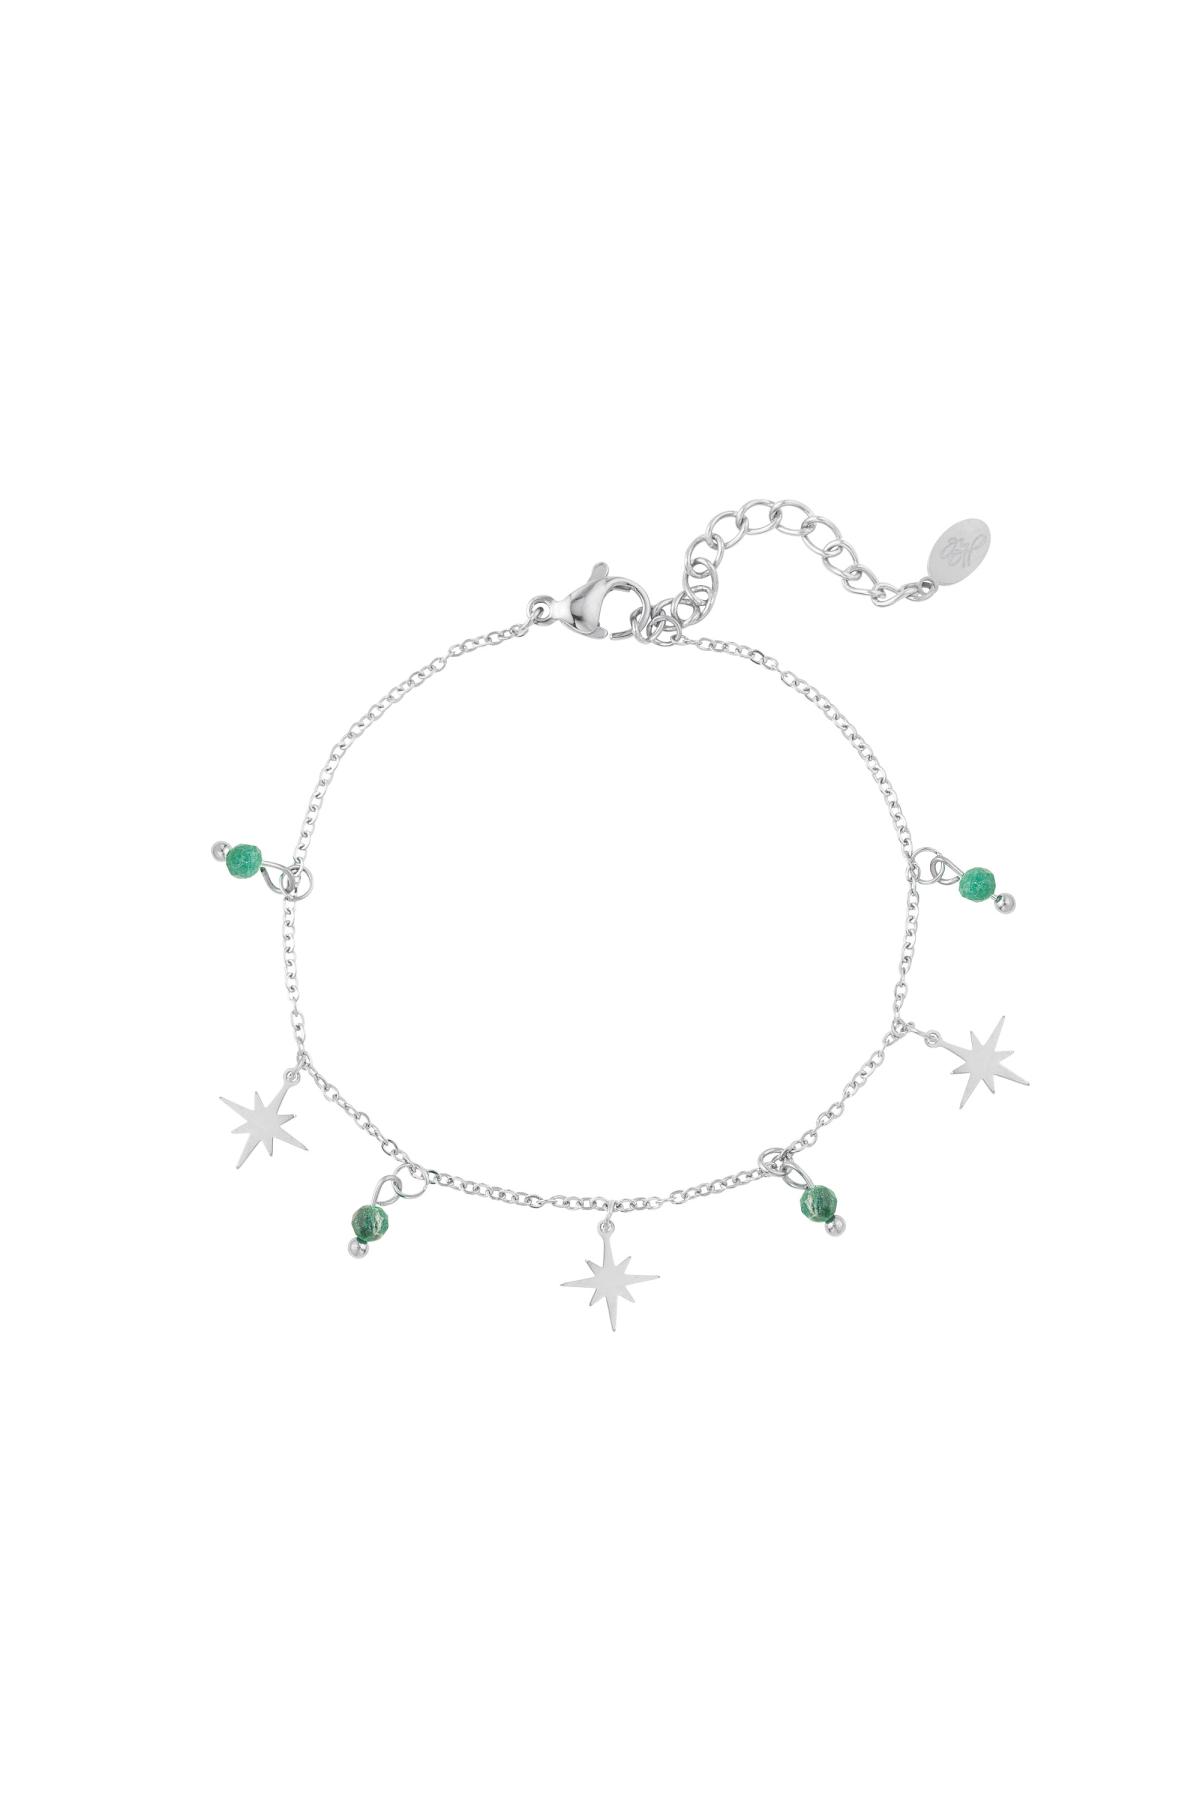 North star bracelet &amp; beads Silver Stainless Steel